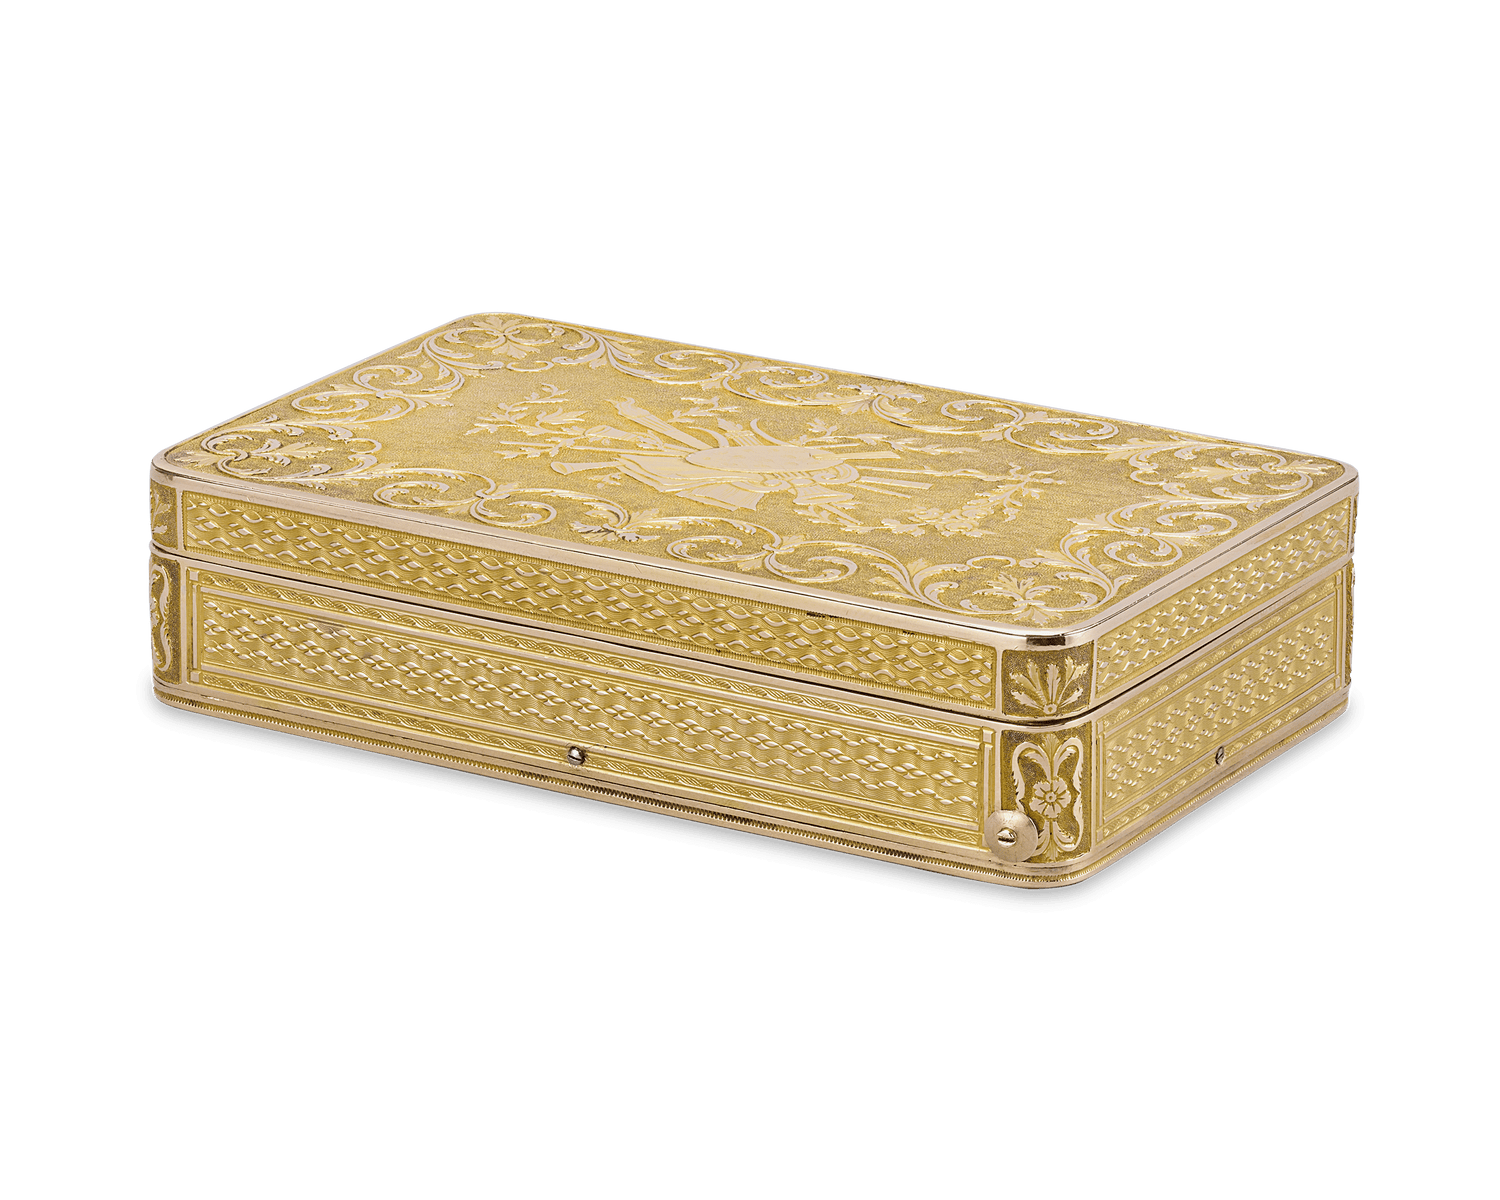 Embossed with a delightful braided gold design, the two-compartment box features an oval agate key